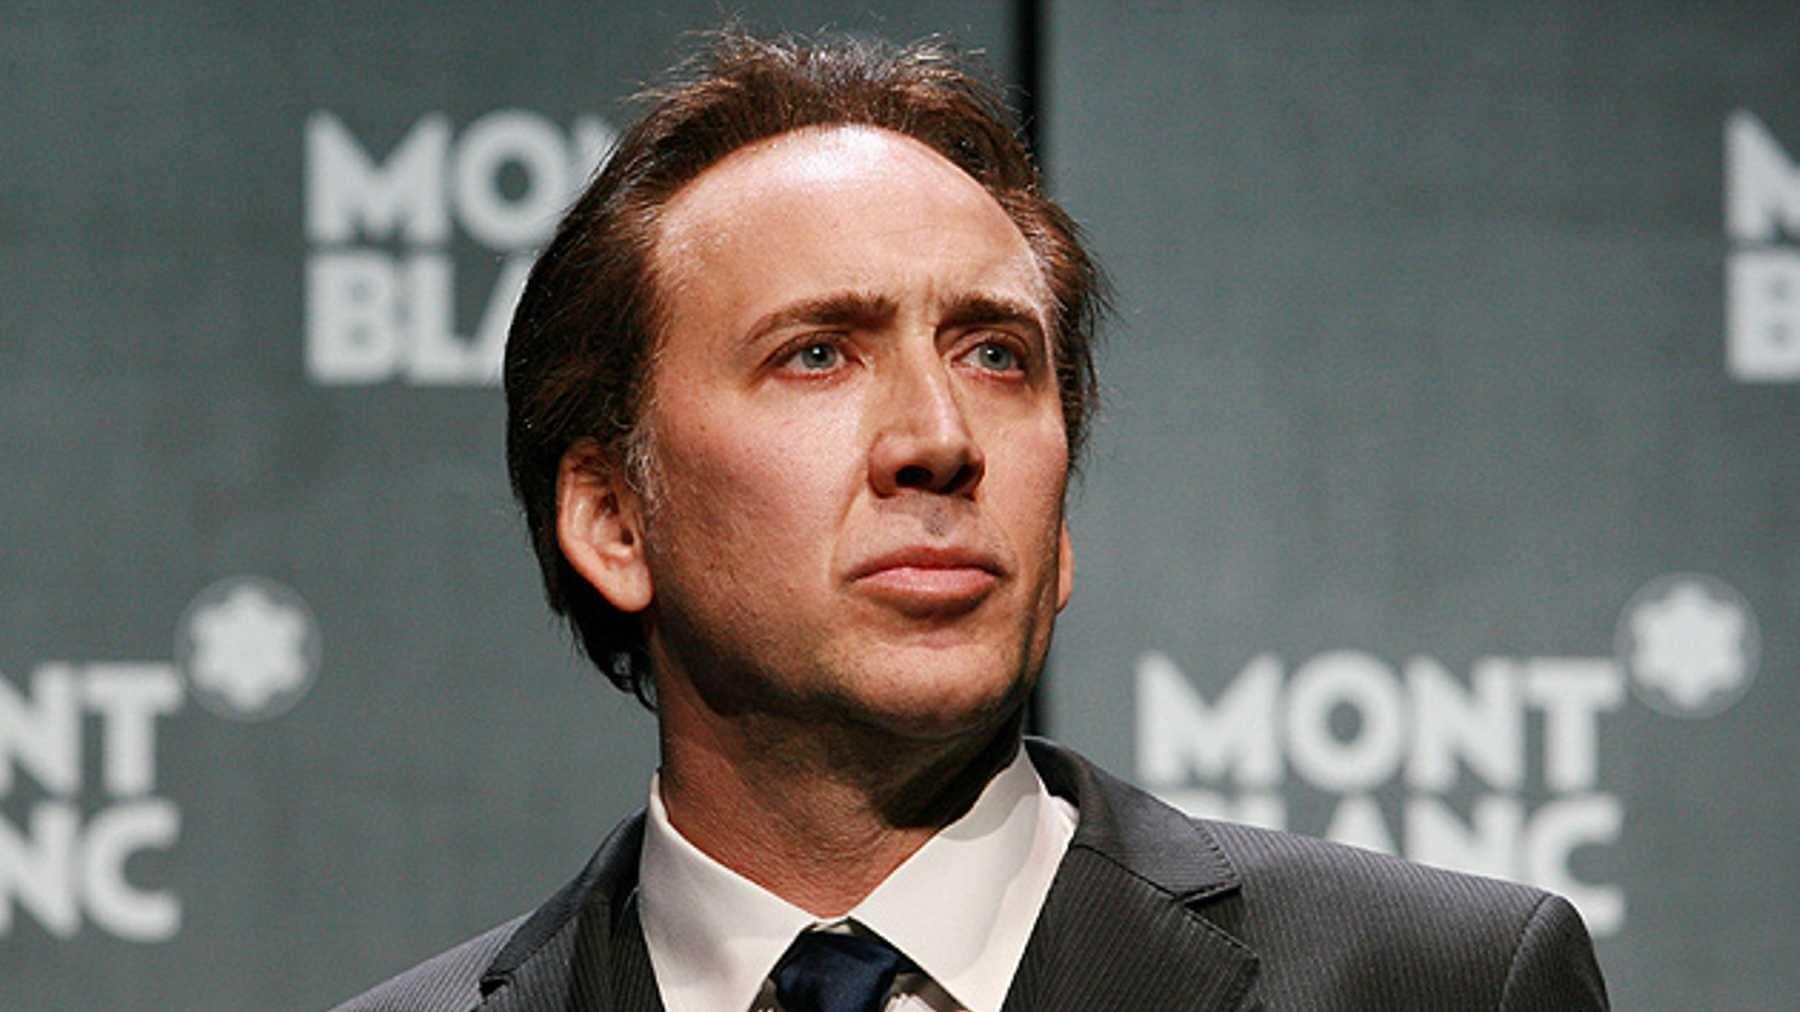 Scripted version of Netflix's Tiger King will star Nicolas Cage as Joe Exotic